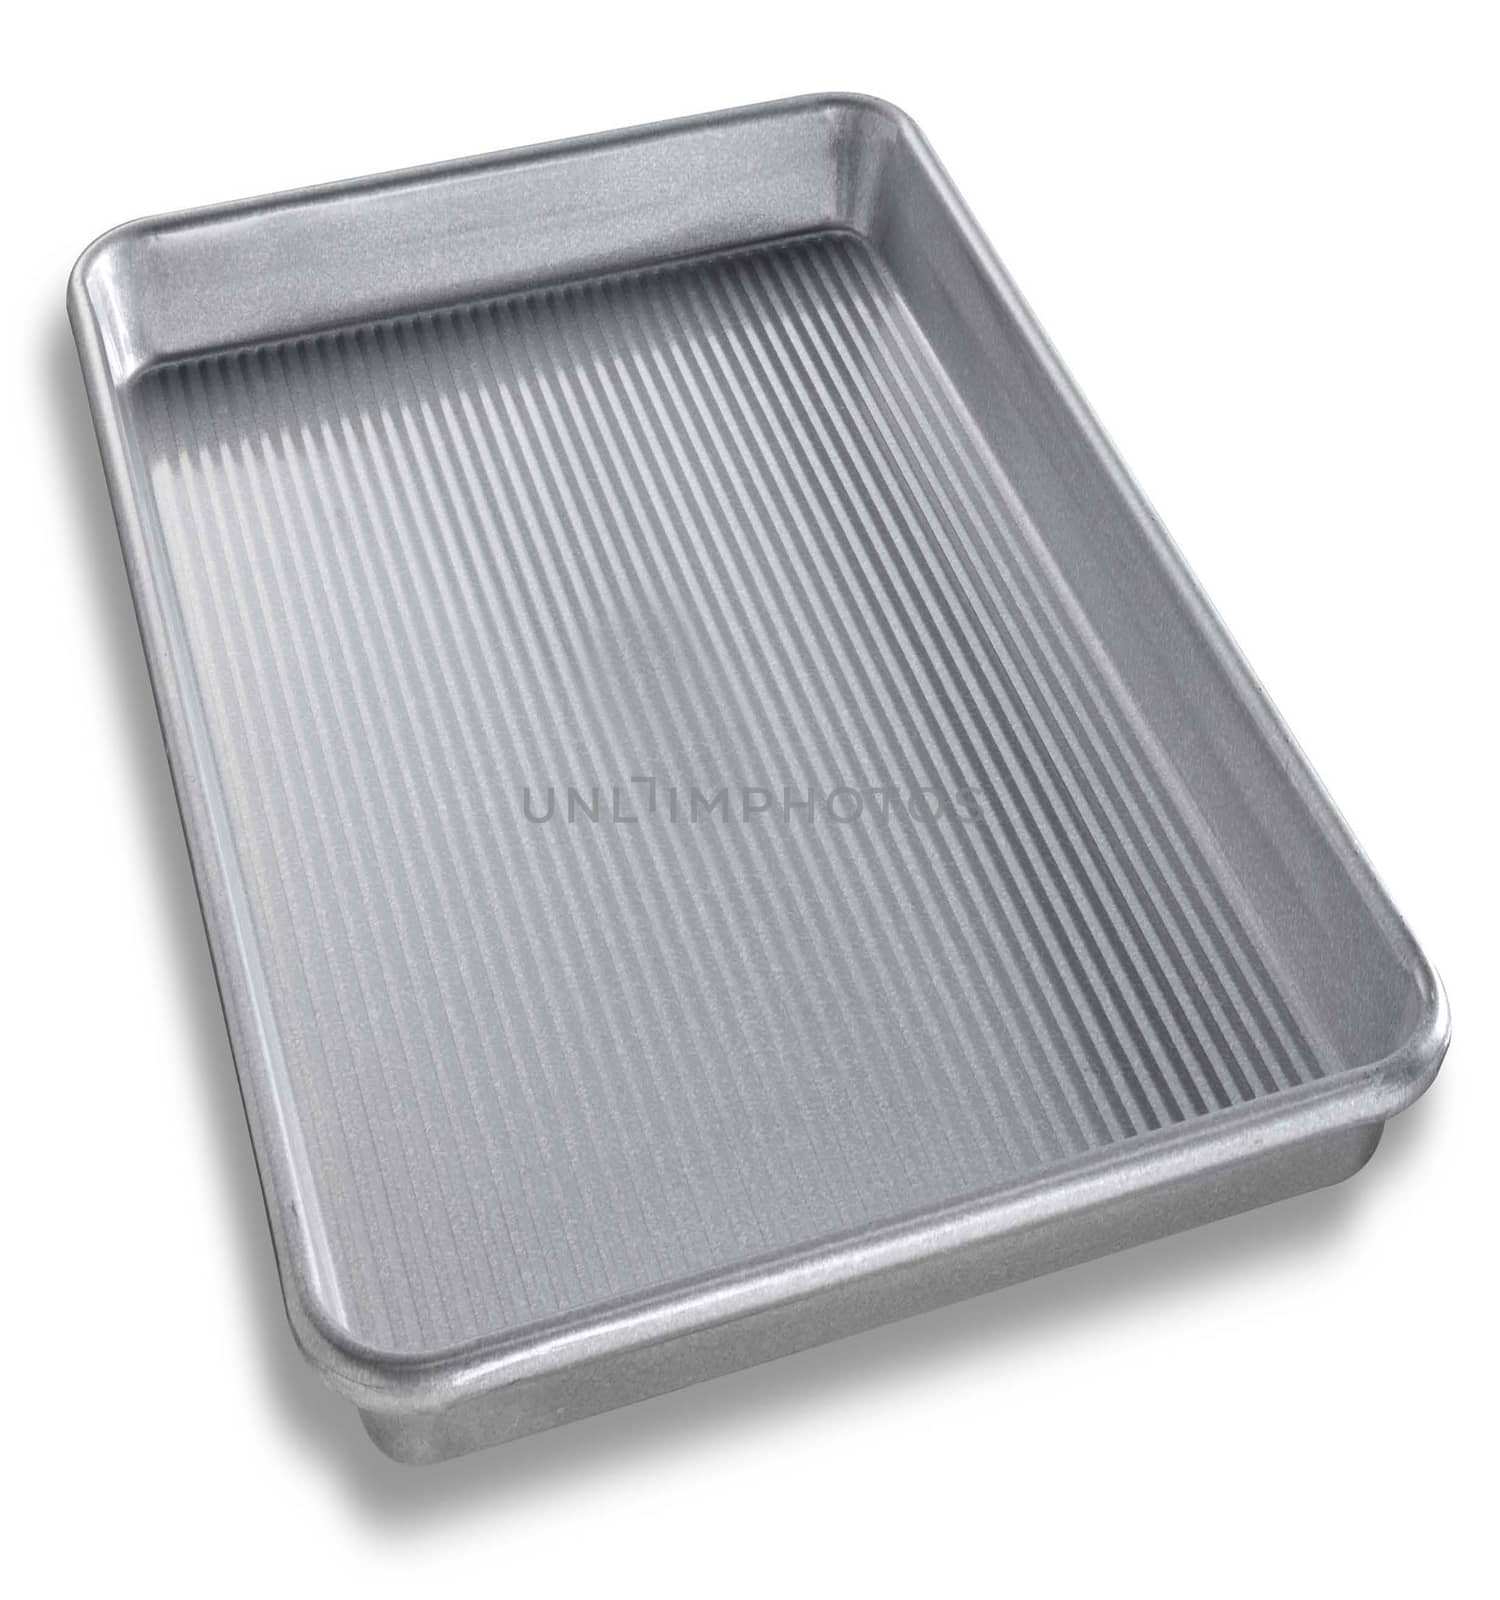 Close-up of an empty tray isolated on white background